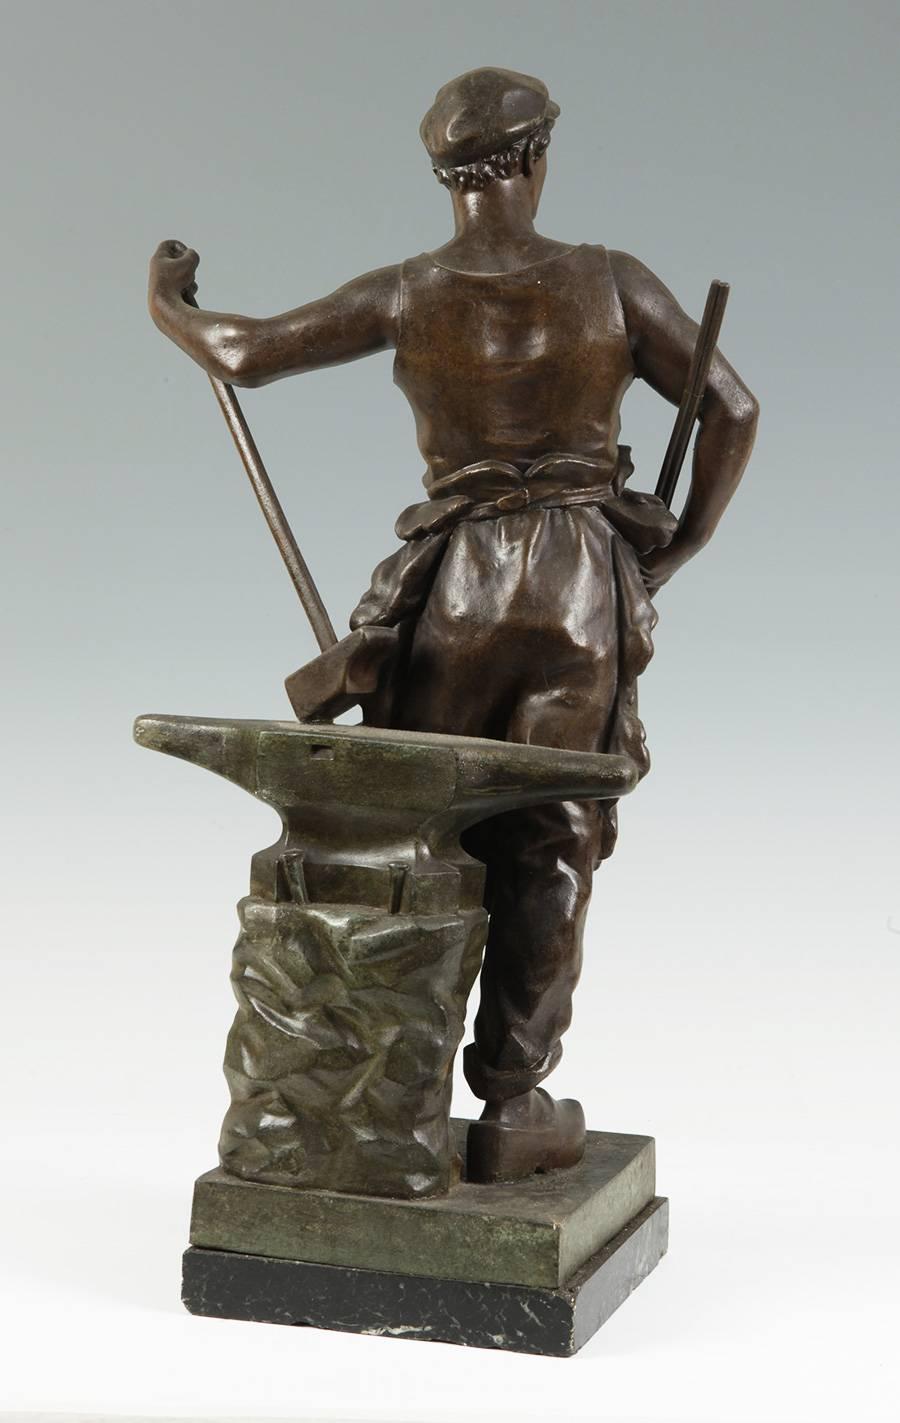 Sculpture in patinated calamine, which shows an allegory of work designed following the neoclassical art, but represents a contemporary worker, with simple clothes, wooden shoes and standing in front of an anvil, holding tongs and a large deck.